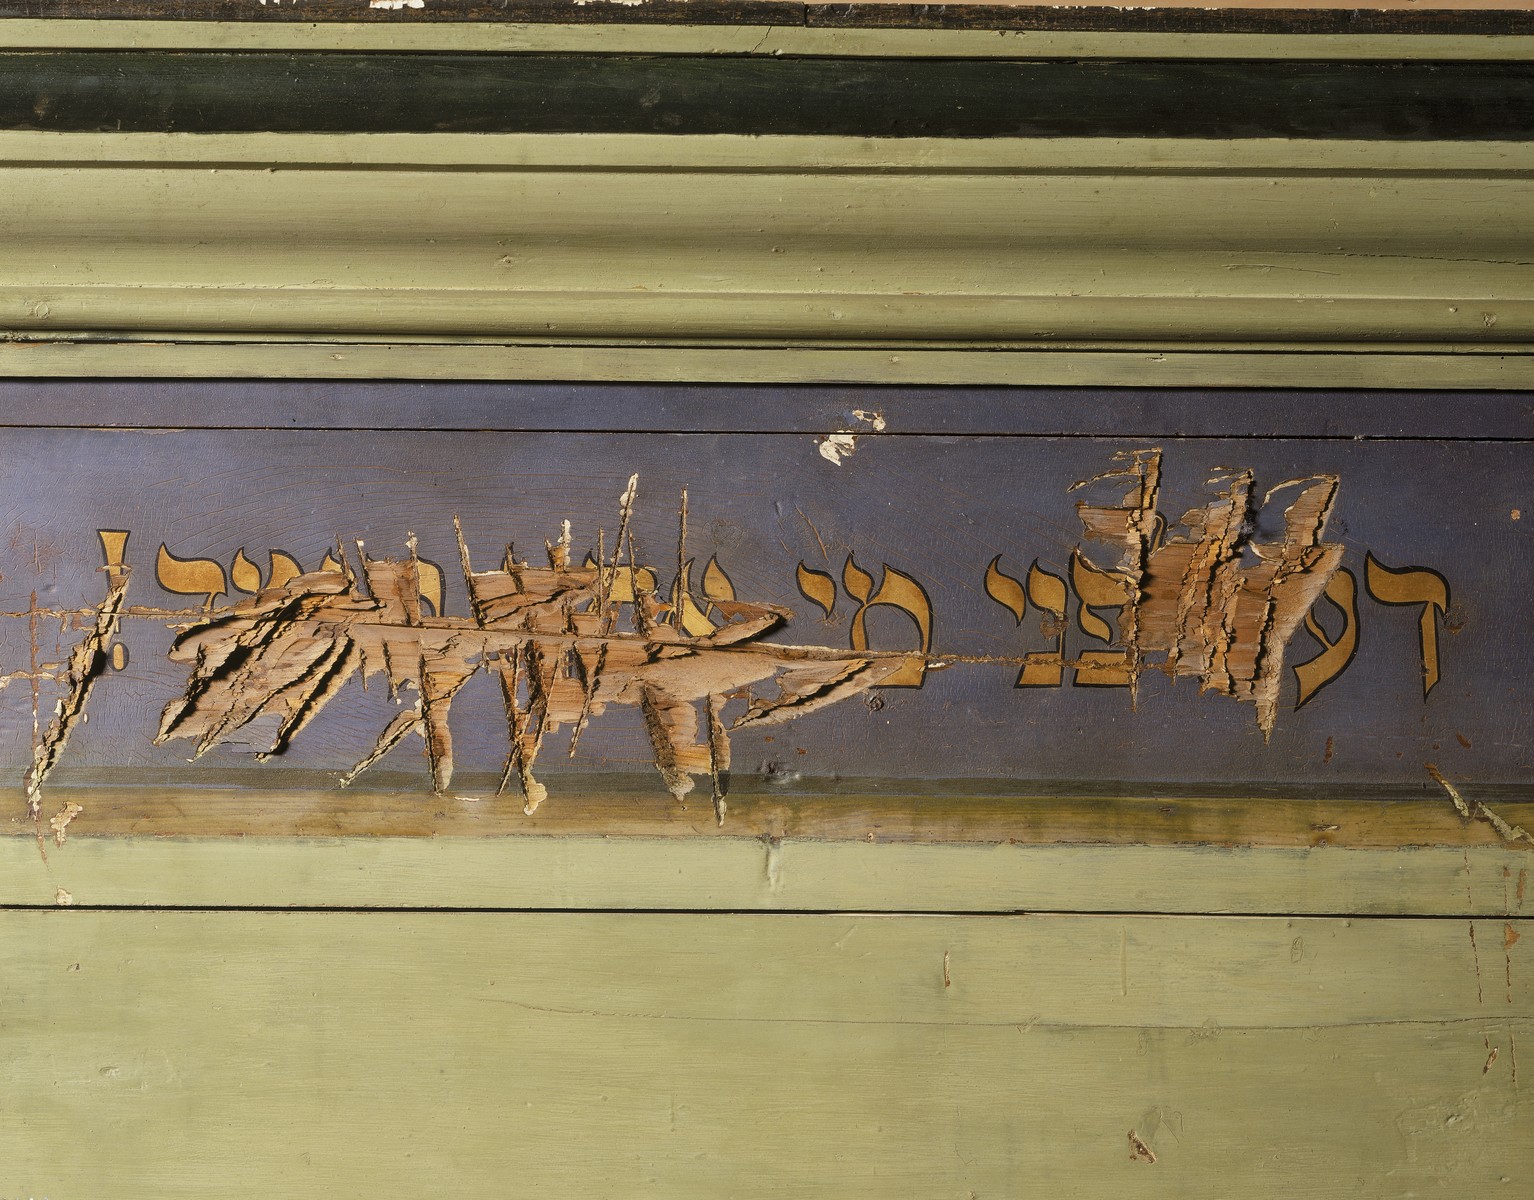 The damaged lintel above a Torah ark from a synagogue in Nentershausen, Germany that was destroyed during Kristallnacht.

The partially damaged Hebrew verse on the lintel reads: "Know before whom you stand".